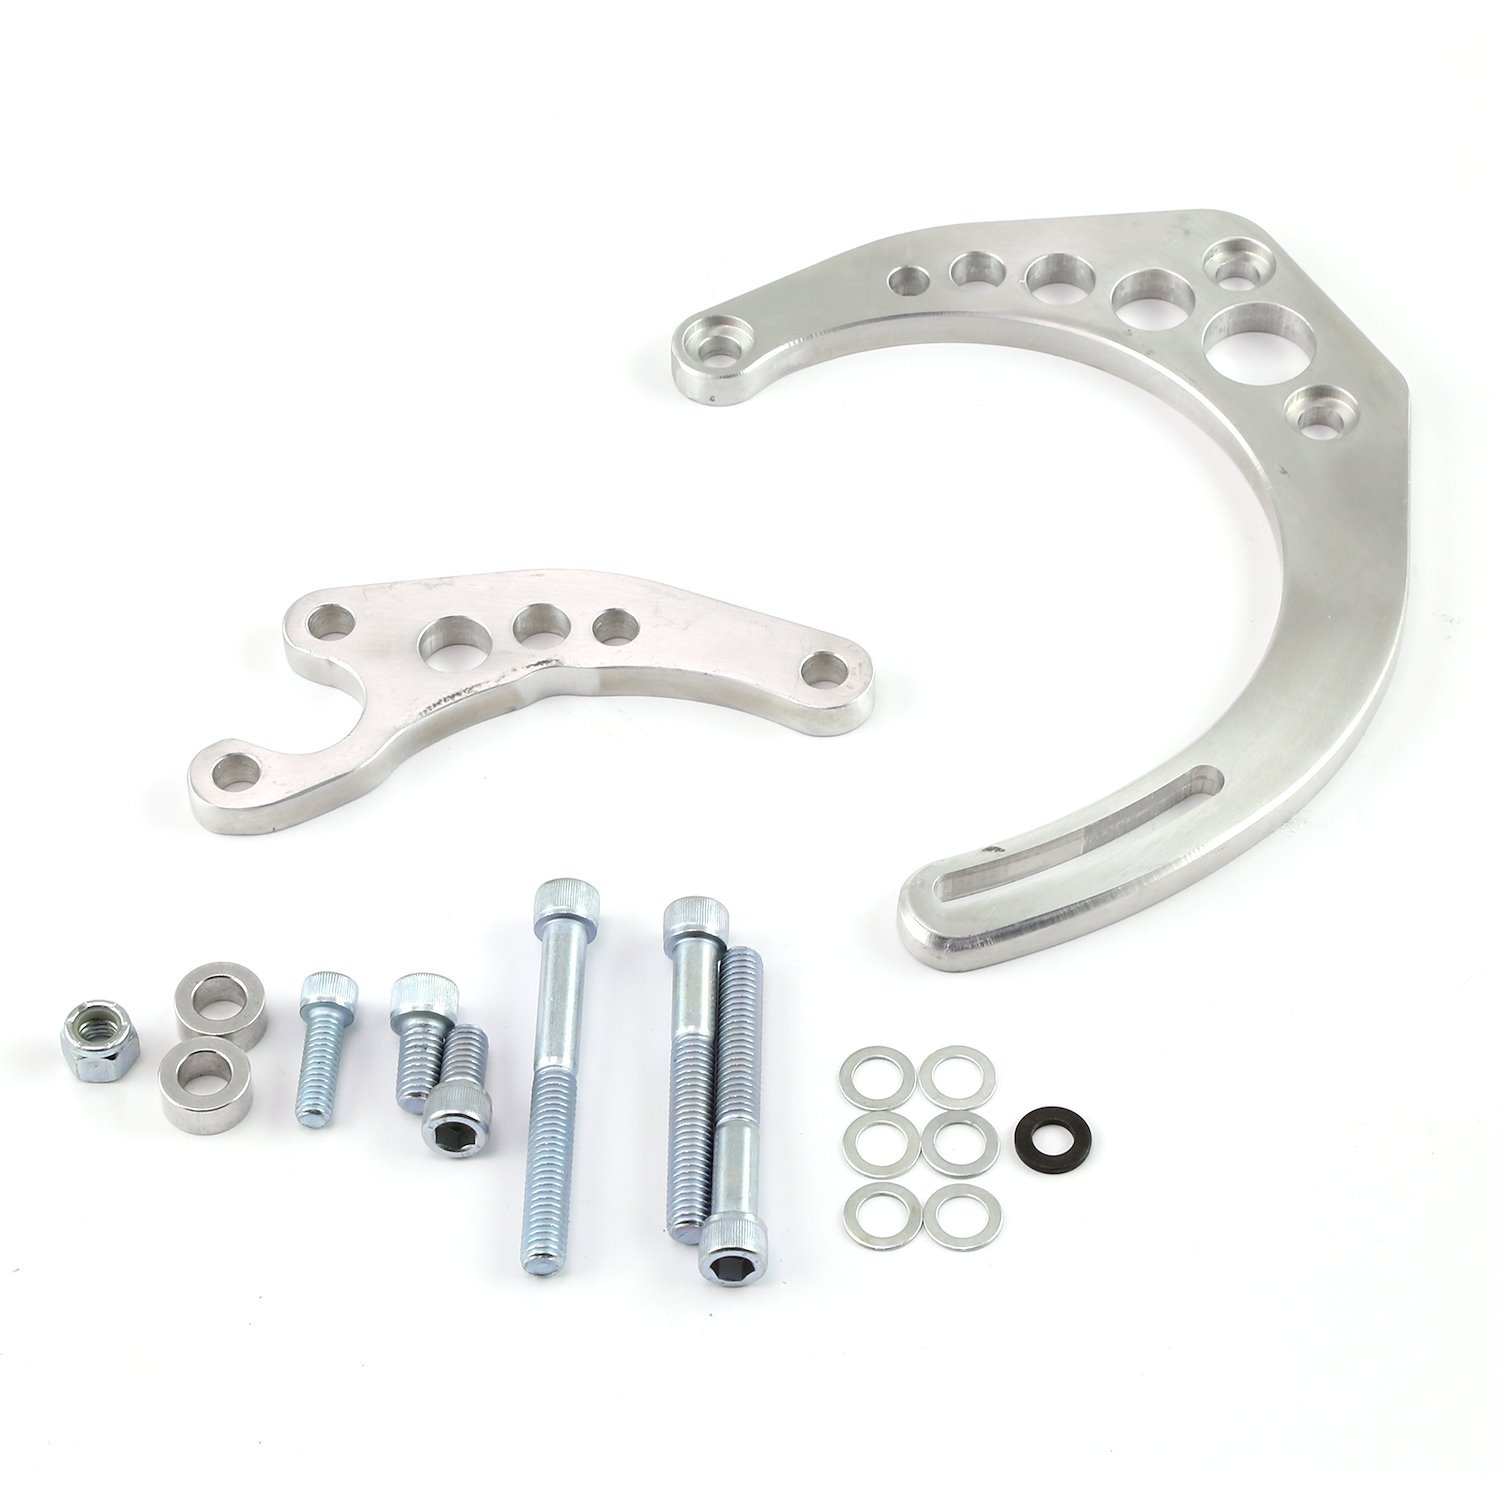 Billet Aluminum Alternator Bracket Kit for Small Block Chevy Camel Hump and Fuelie Engines